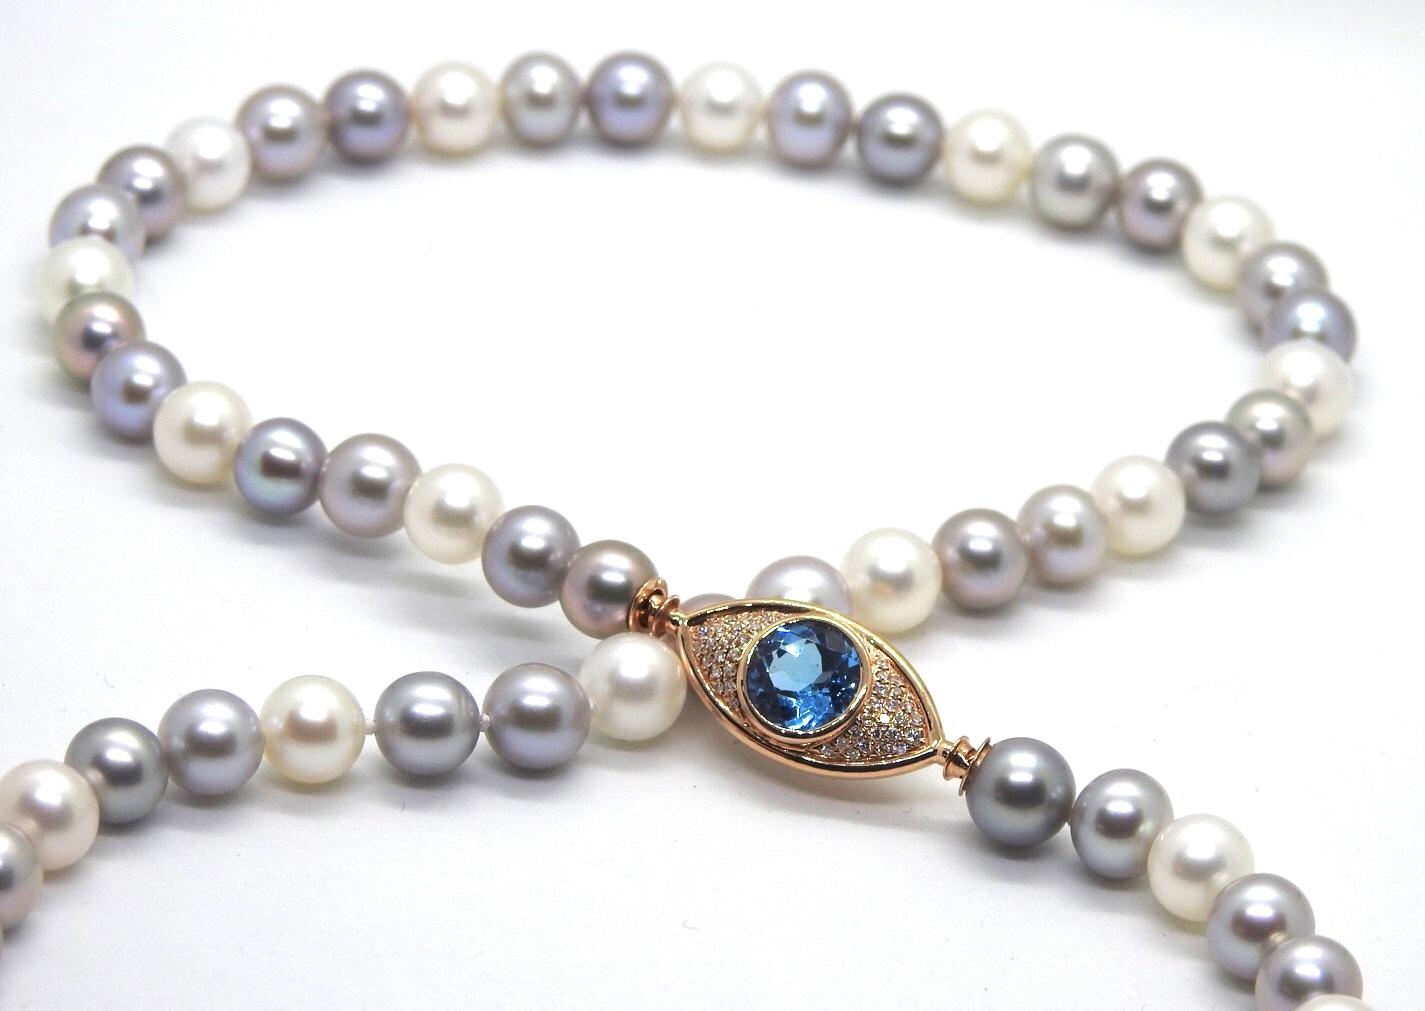 ARGOS necklace is a strand of  8mm cultured pearls, with 18K rose gold 